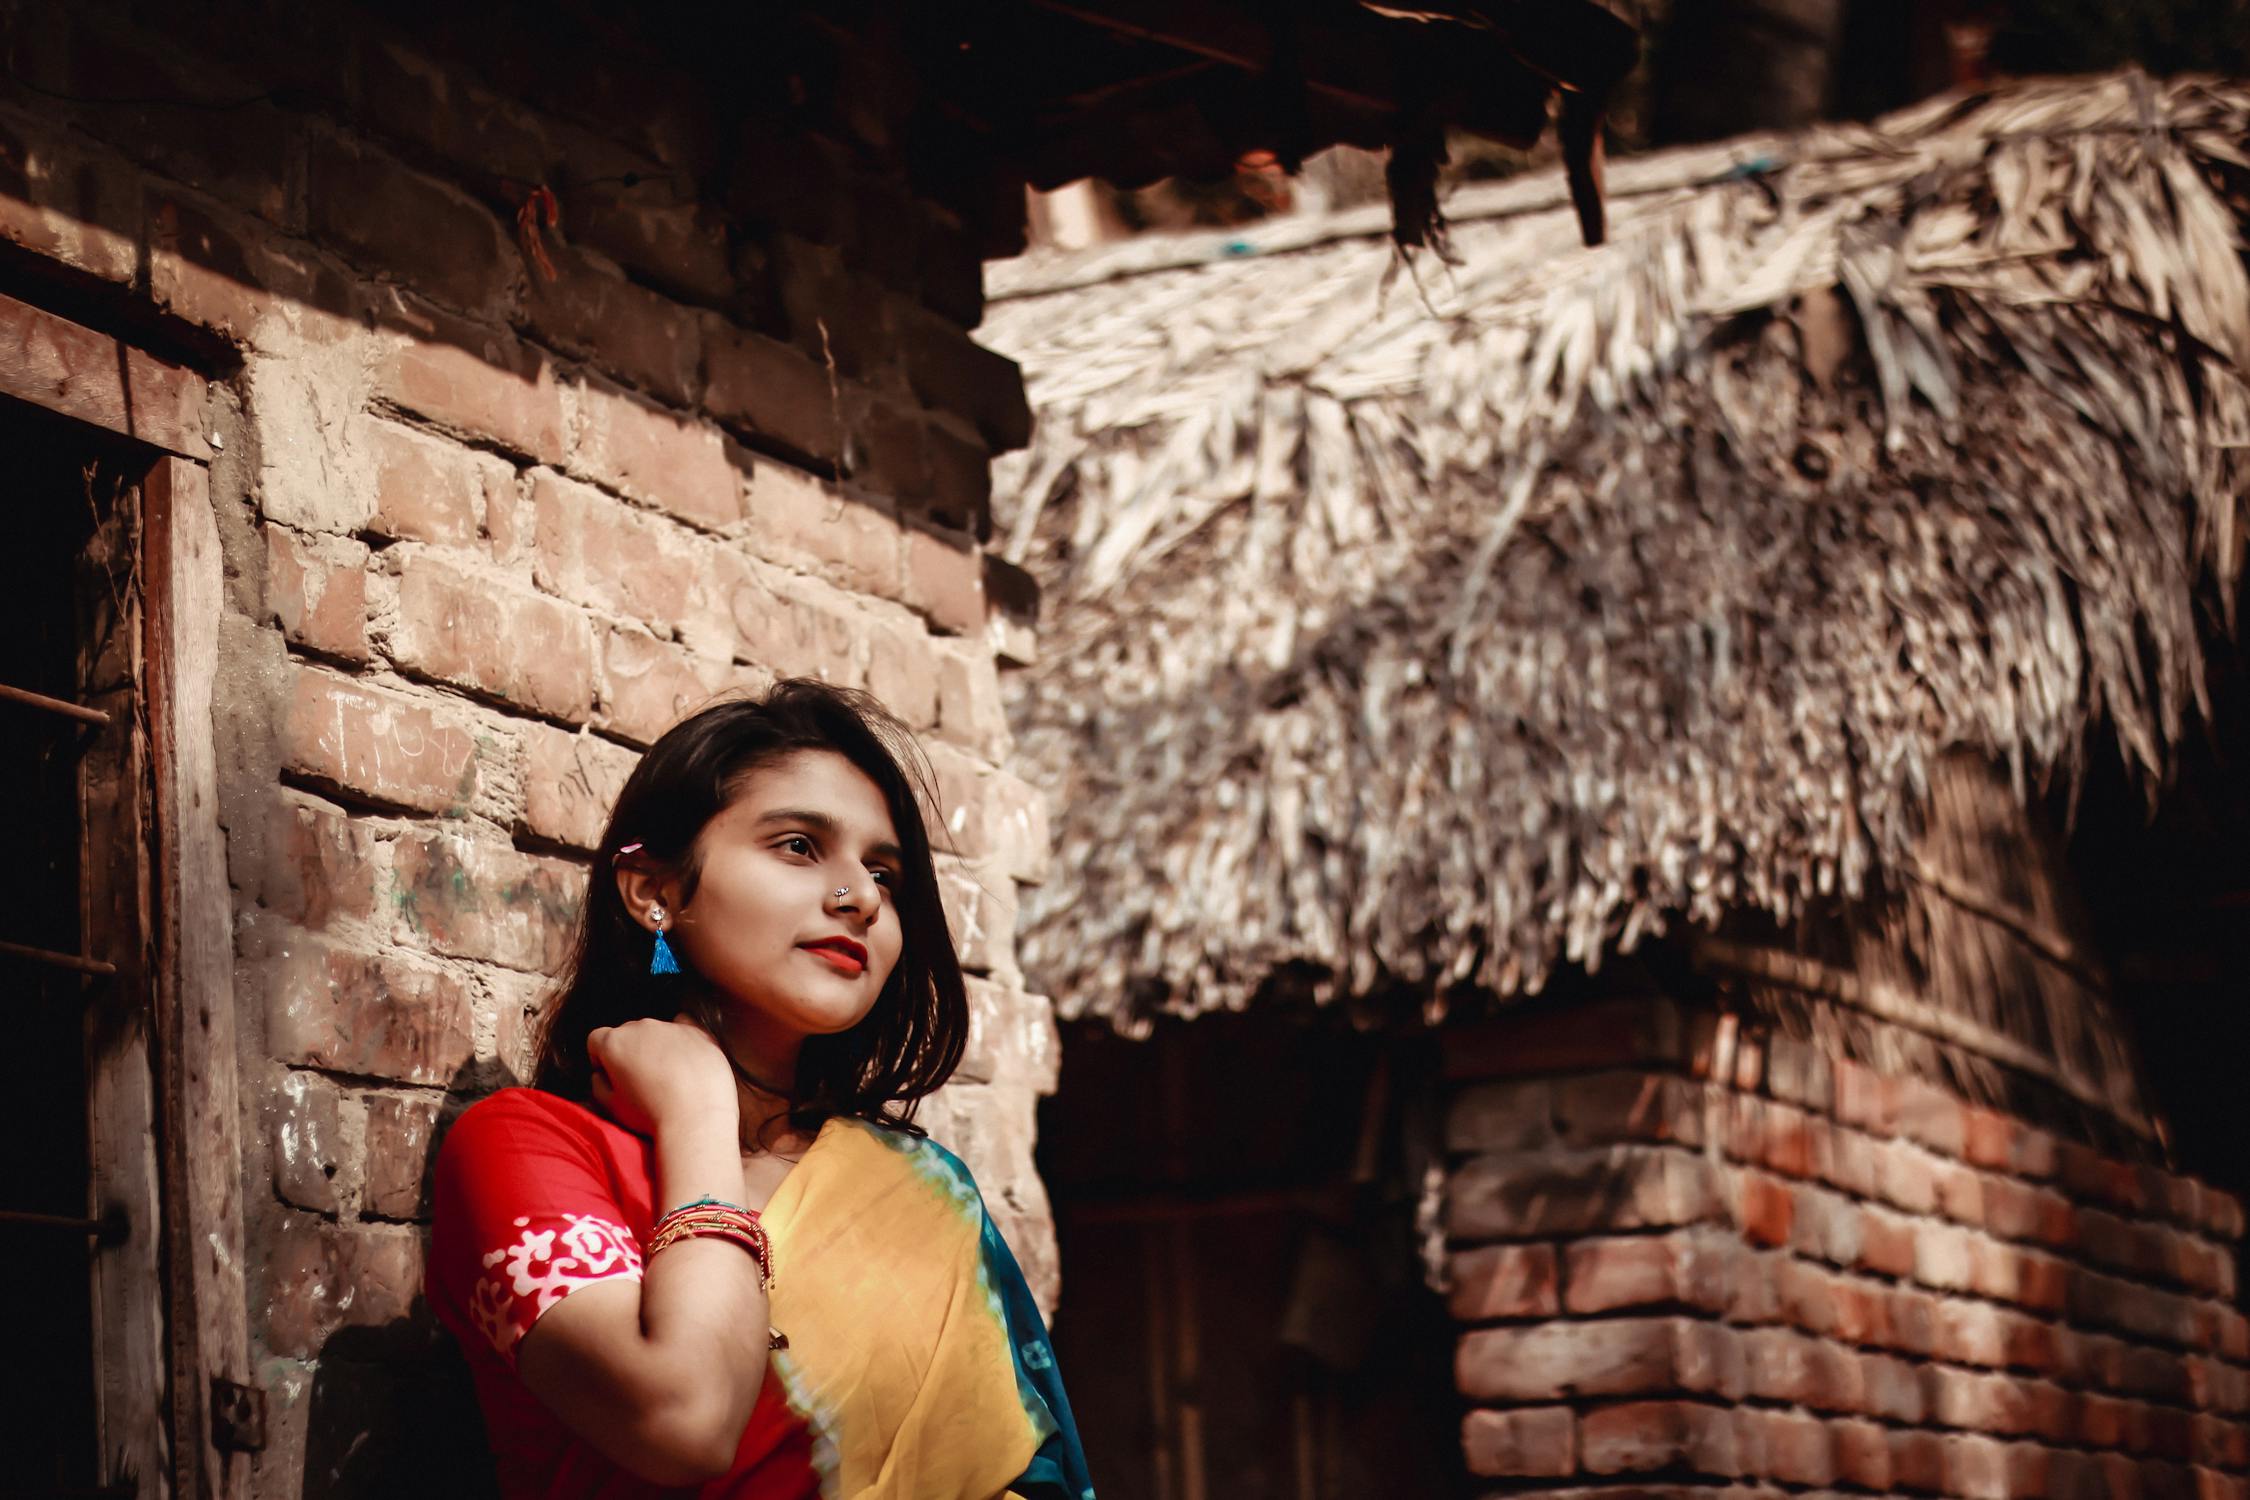 Indian Lady Photo by Azraq Al Rezoan  from Pexels: https://www.pexels.com/photo/young-indian-woman-in-traditional-bright-sari-5392783/